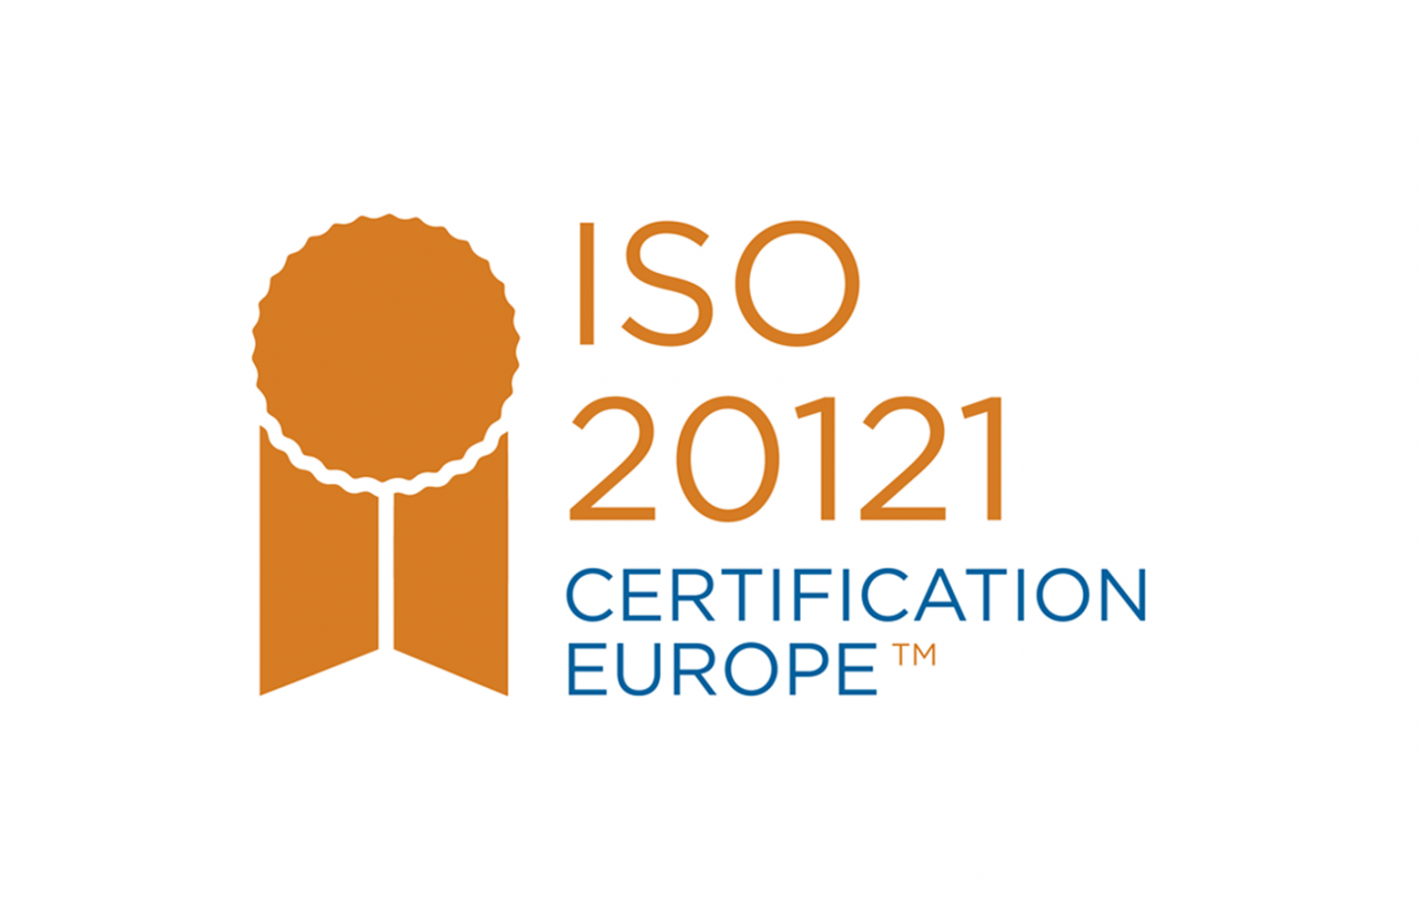 iso 20121